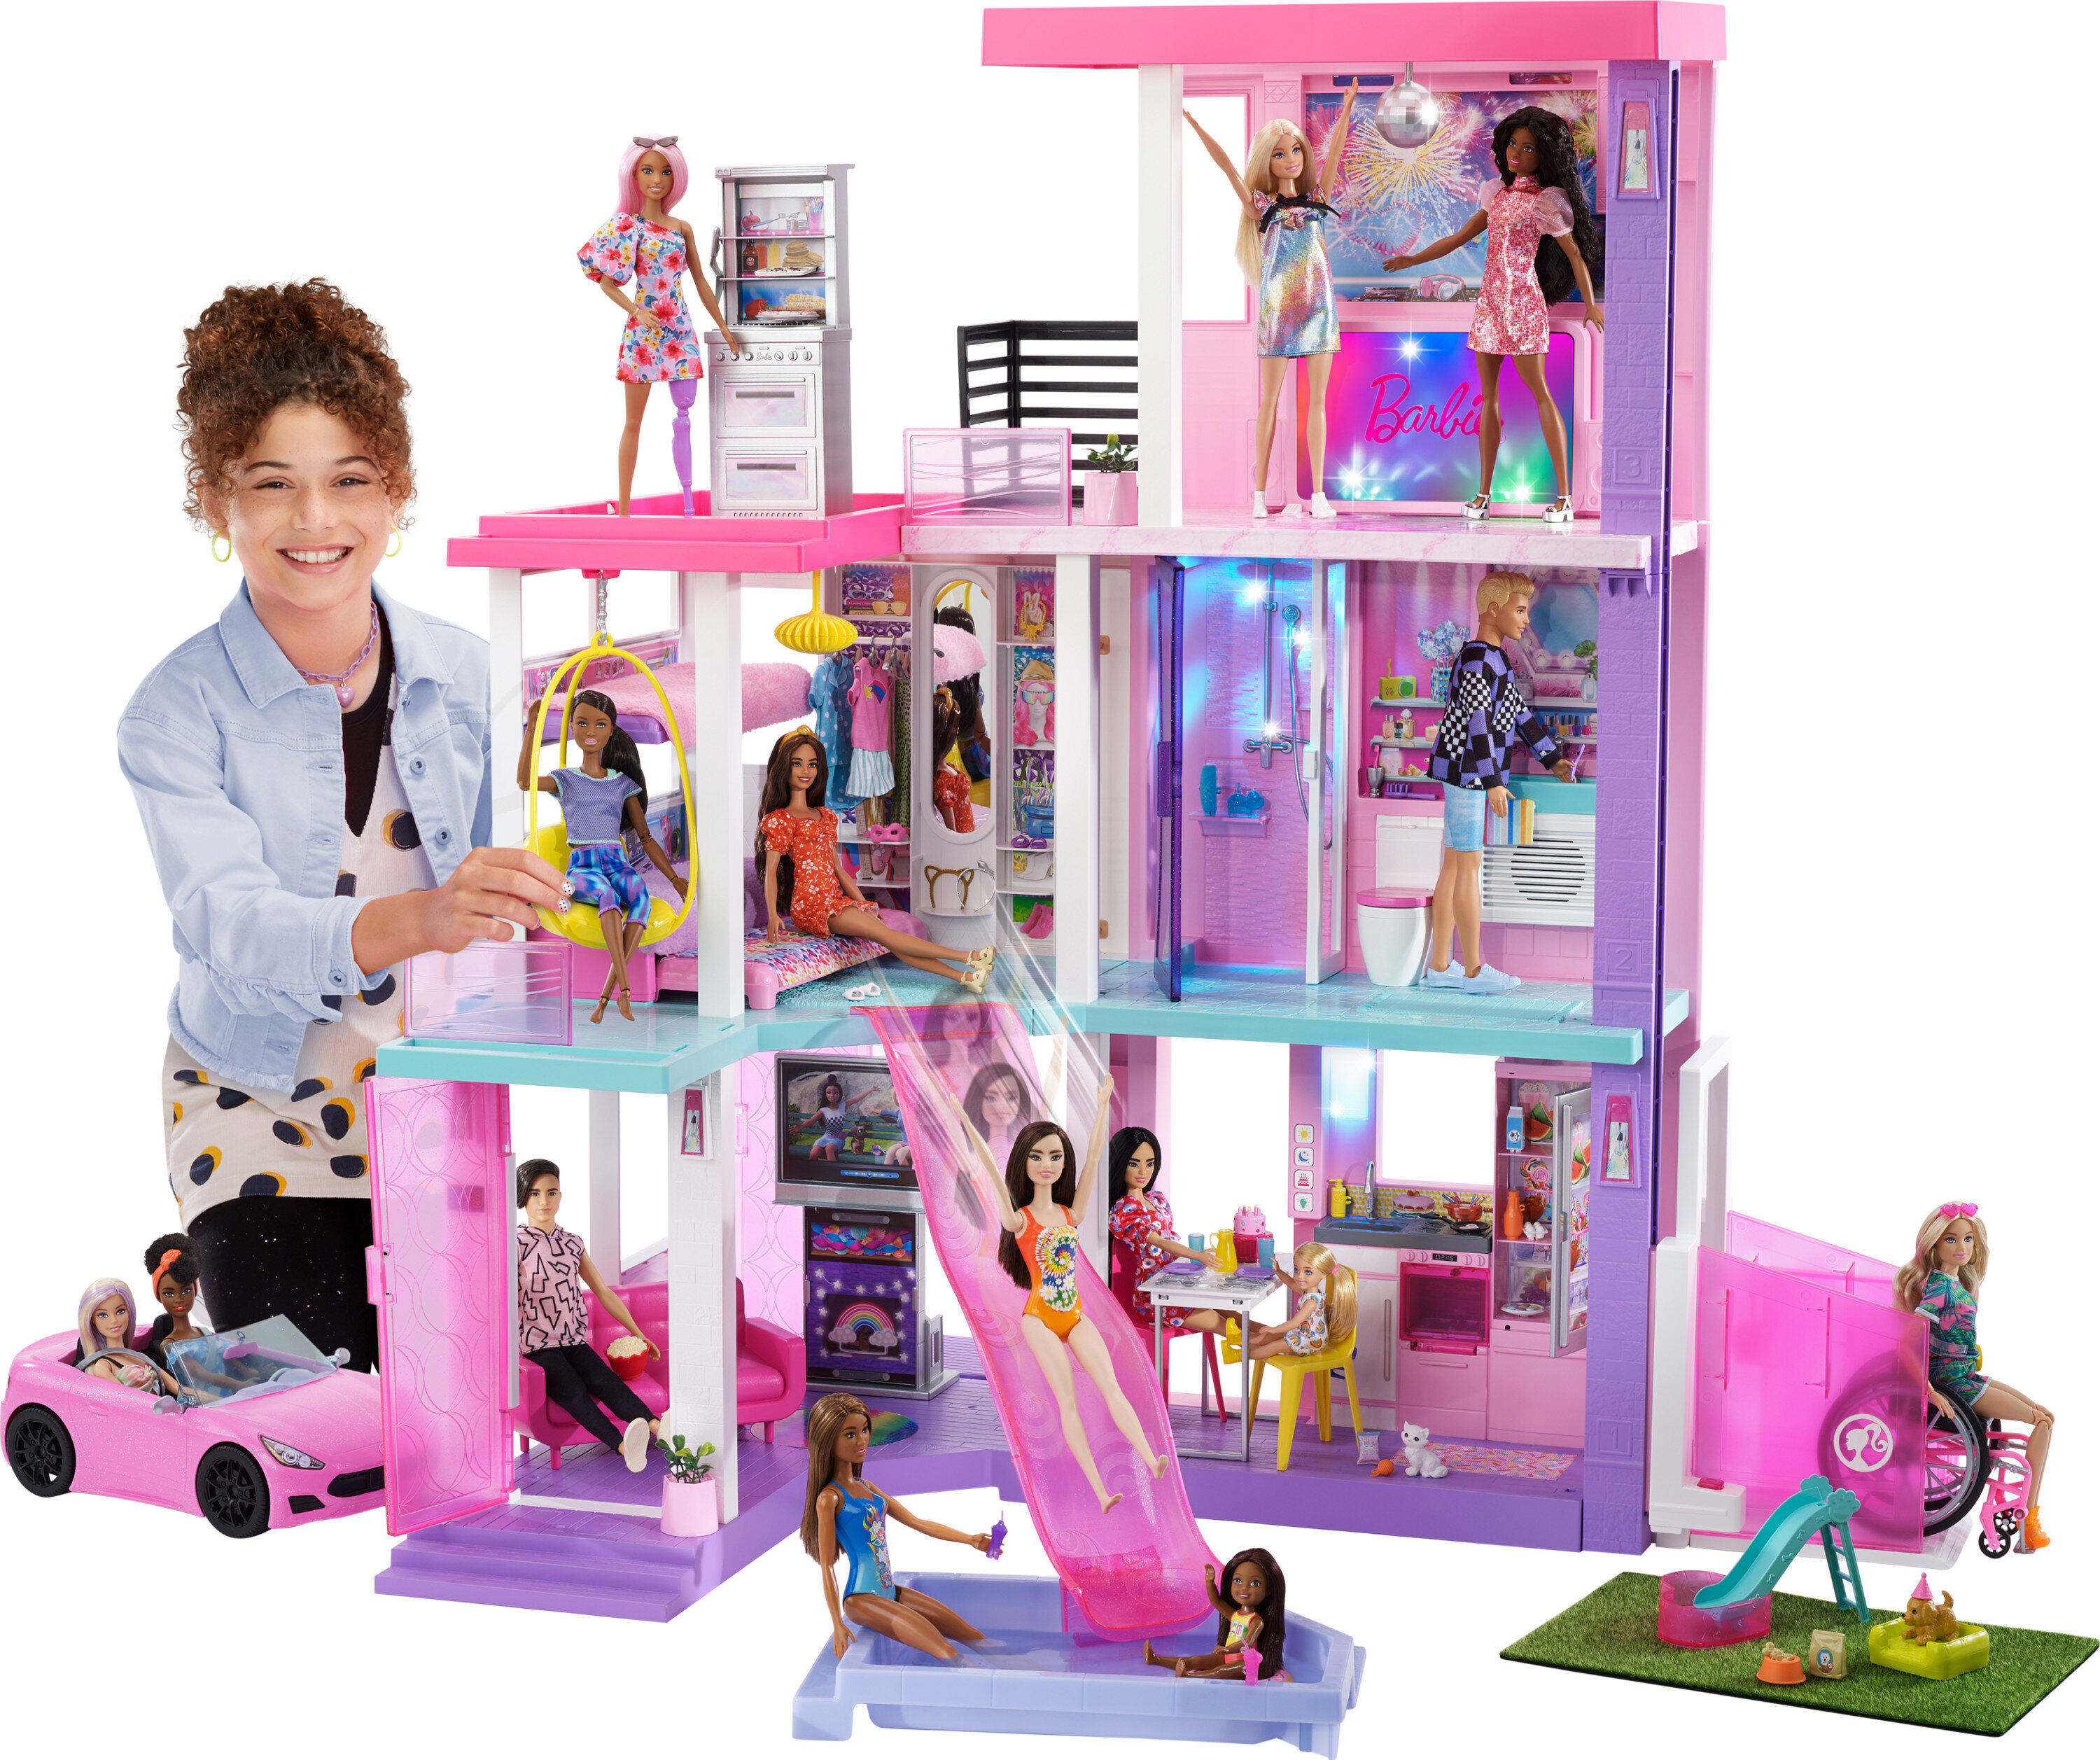 Barbie Deluxe Special Edition 60th DreamHouse Playset with 2 Dolls, Car & 100+ Pieces - image 1 of 8